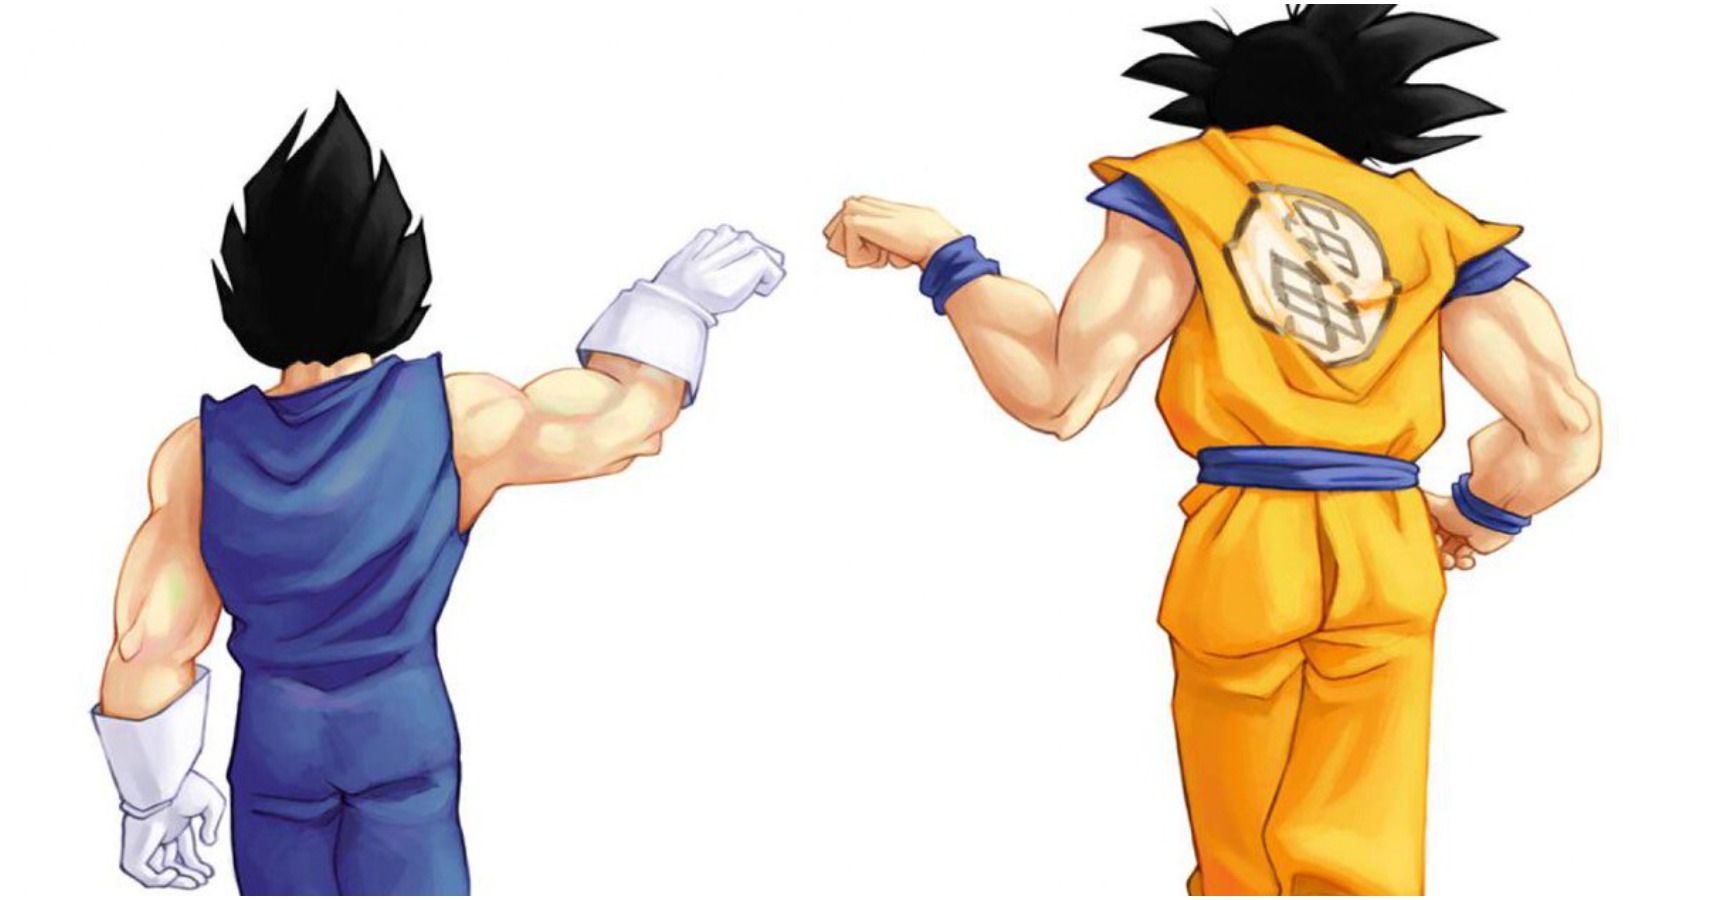 10 Important Details You Didn’t Know About Goku & Vegeta’s Friendship